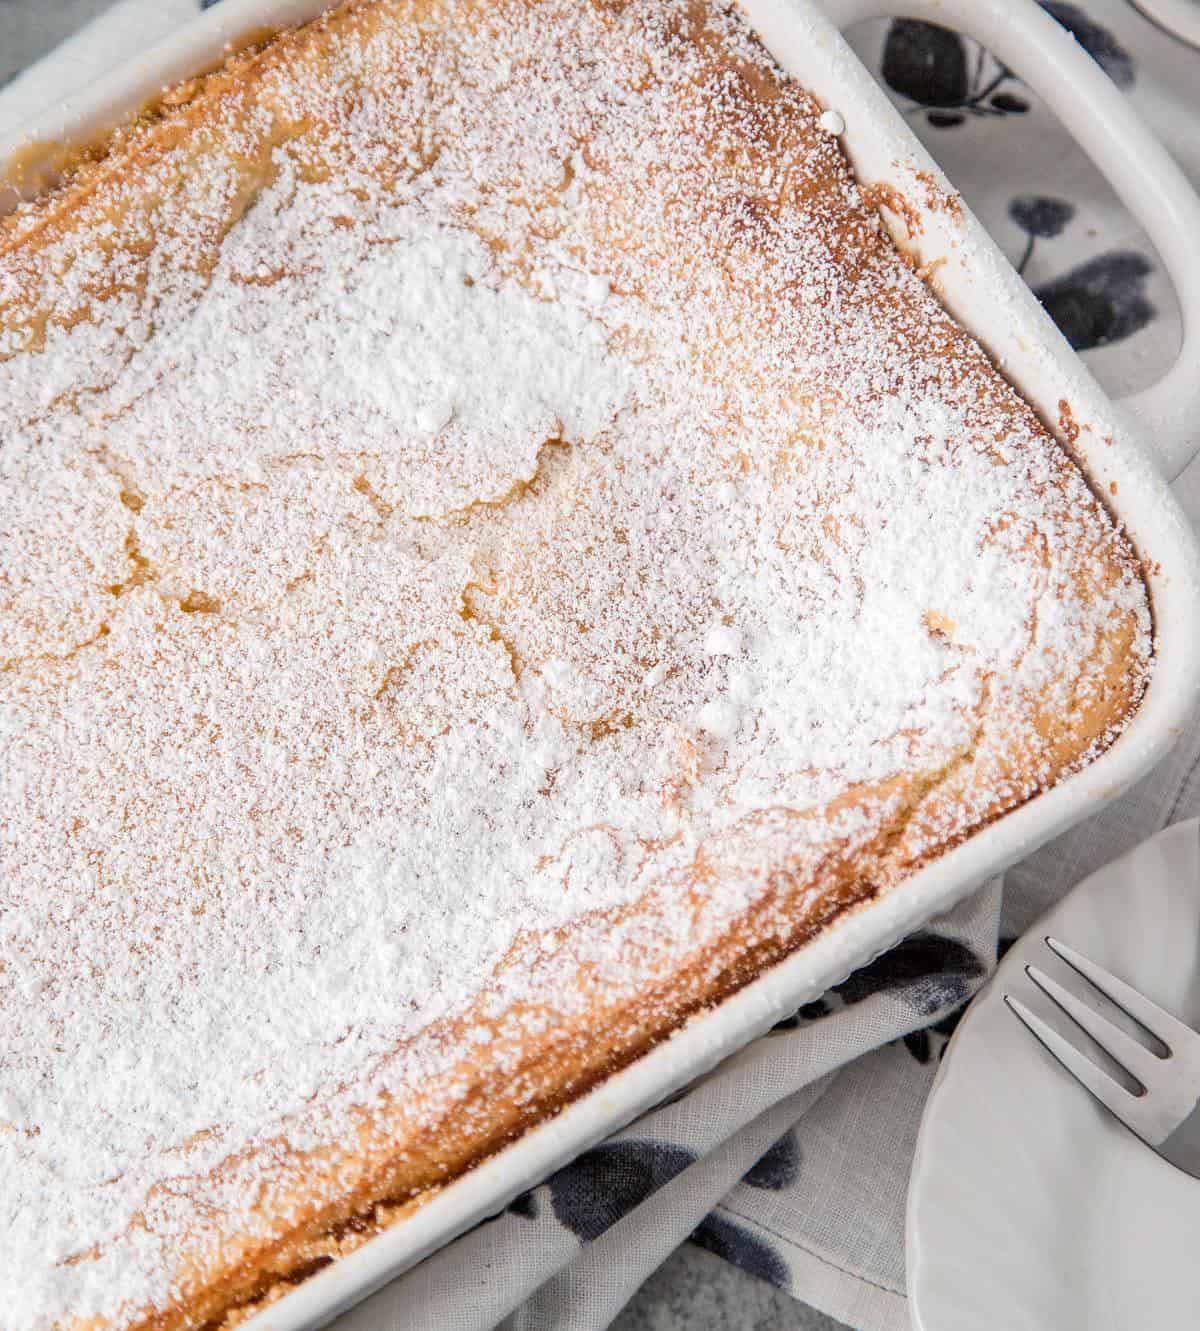  Sink your teeth into this magnificently rich and gooey butter cake